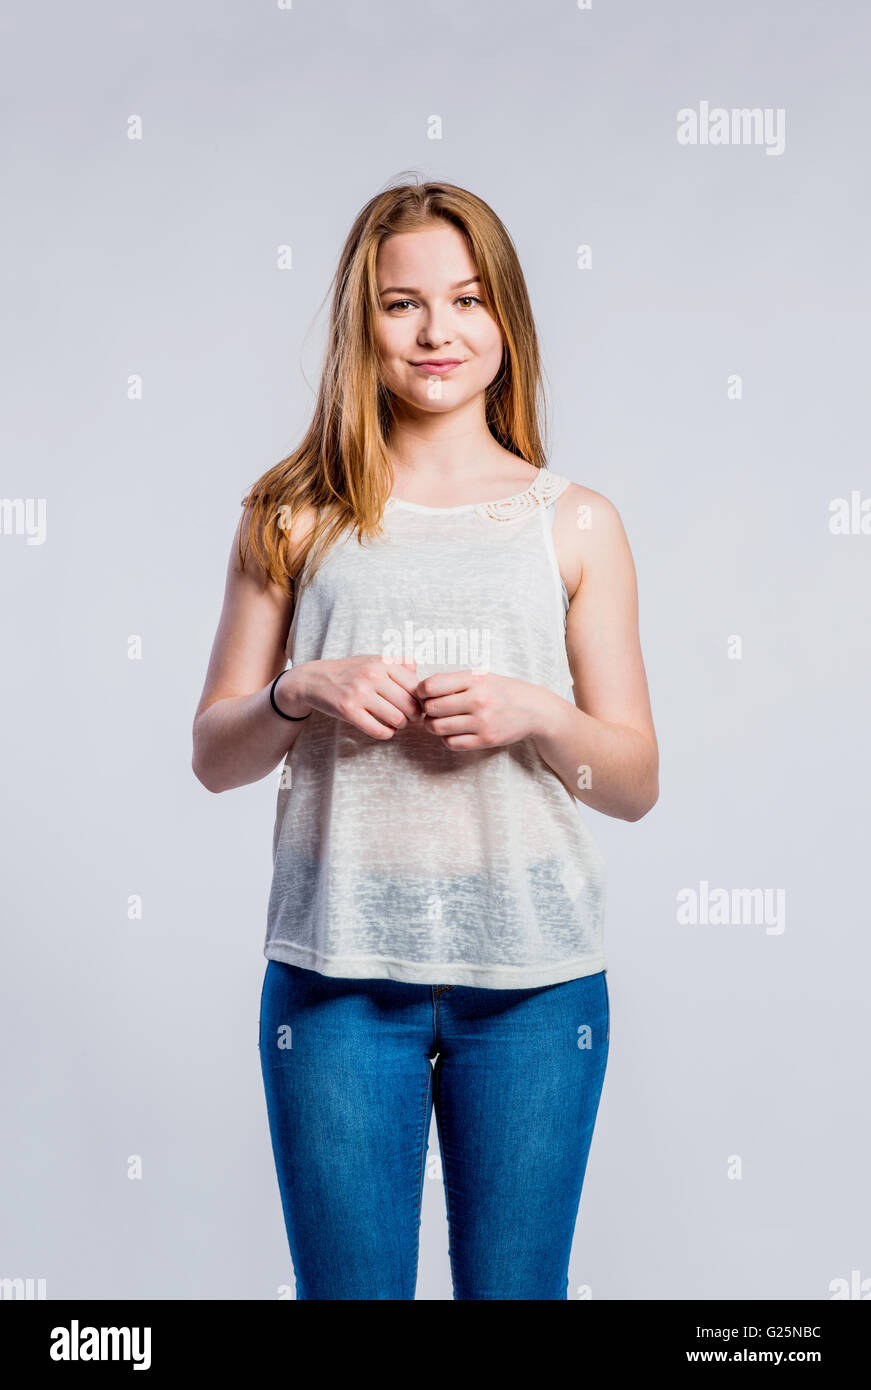 https://c8.alamy.com/comp/G25NBC/girl-in-jeans-and-singlet-young-woman-studio-shot-G25NBC.jpg